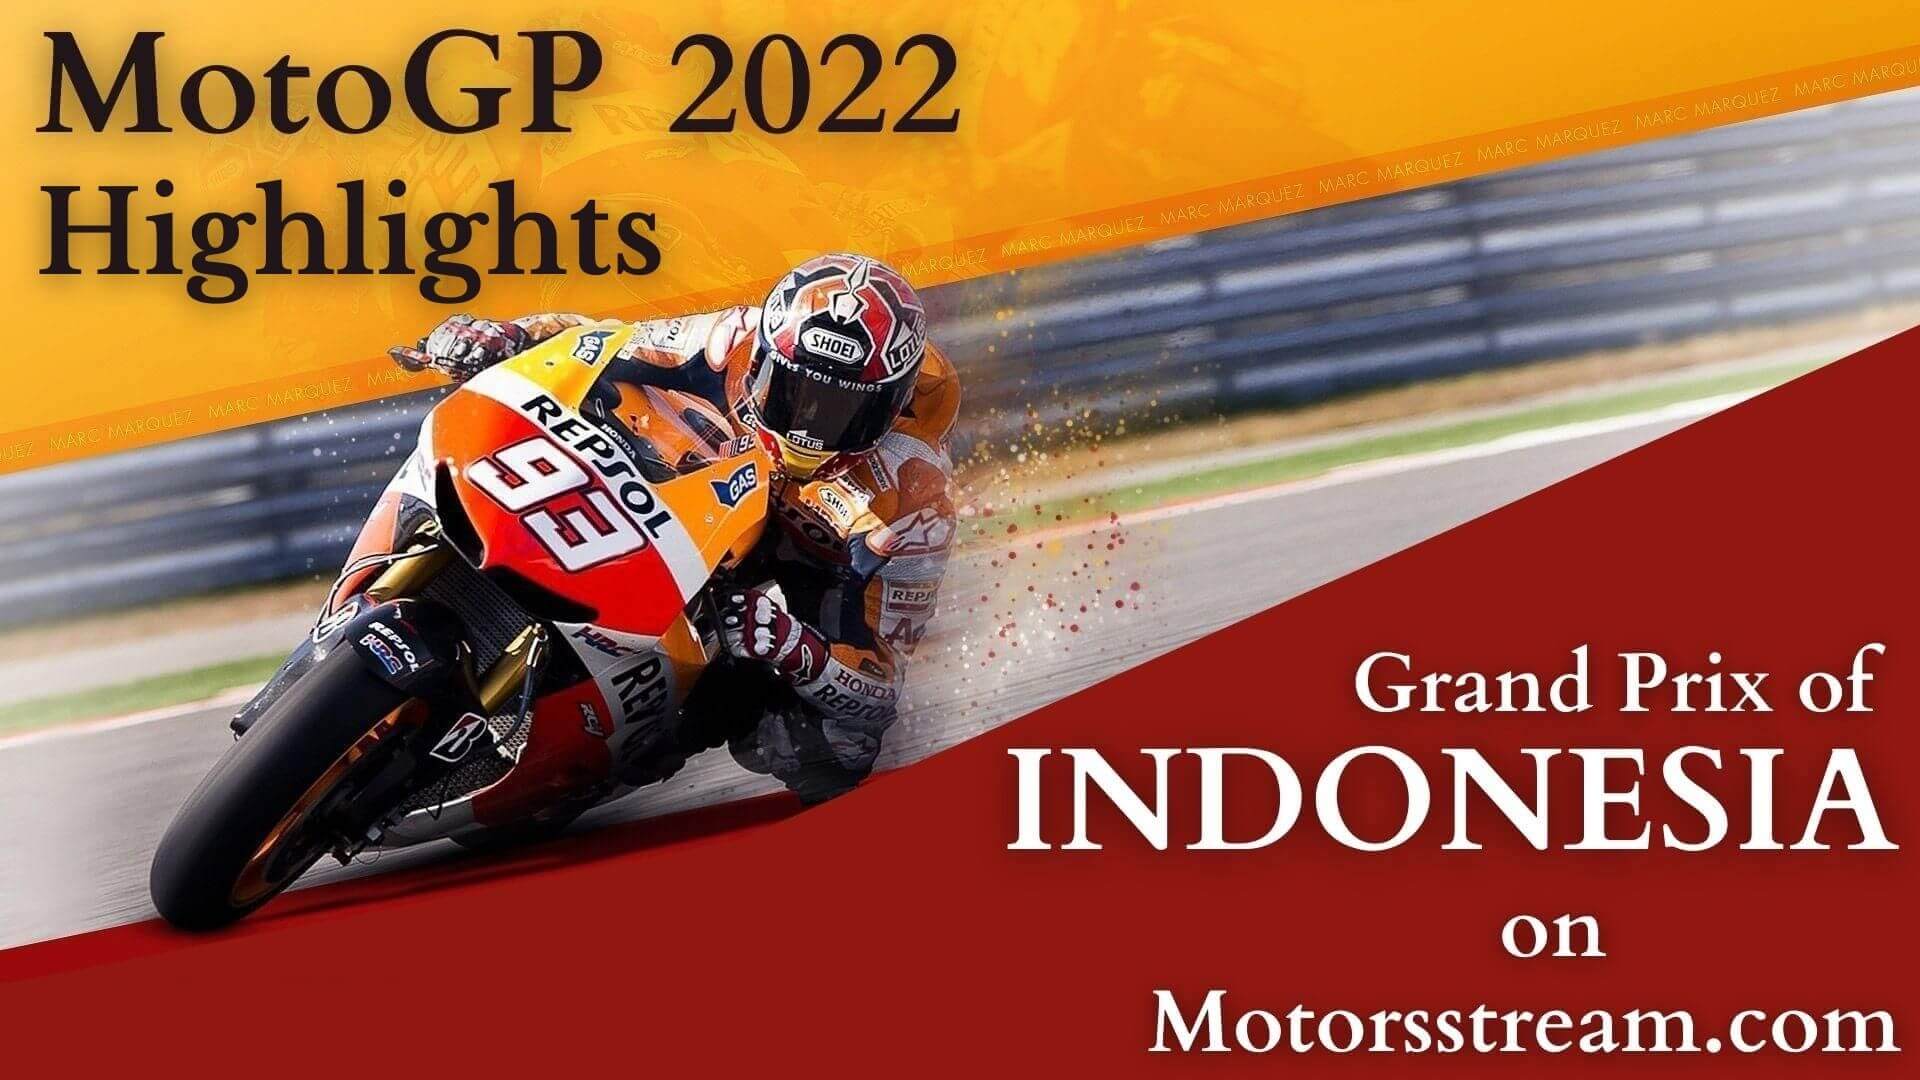 Indonesia Motorcycle Grand Prix Highlights 2022